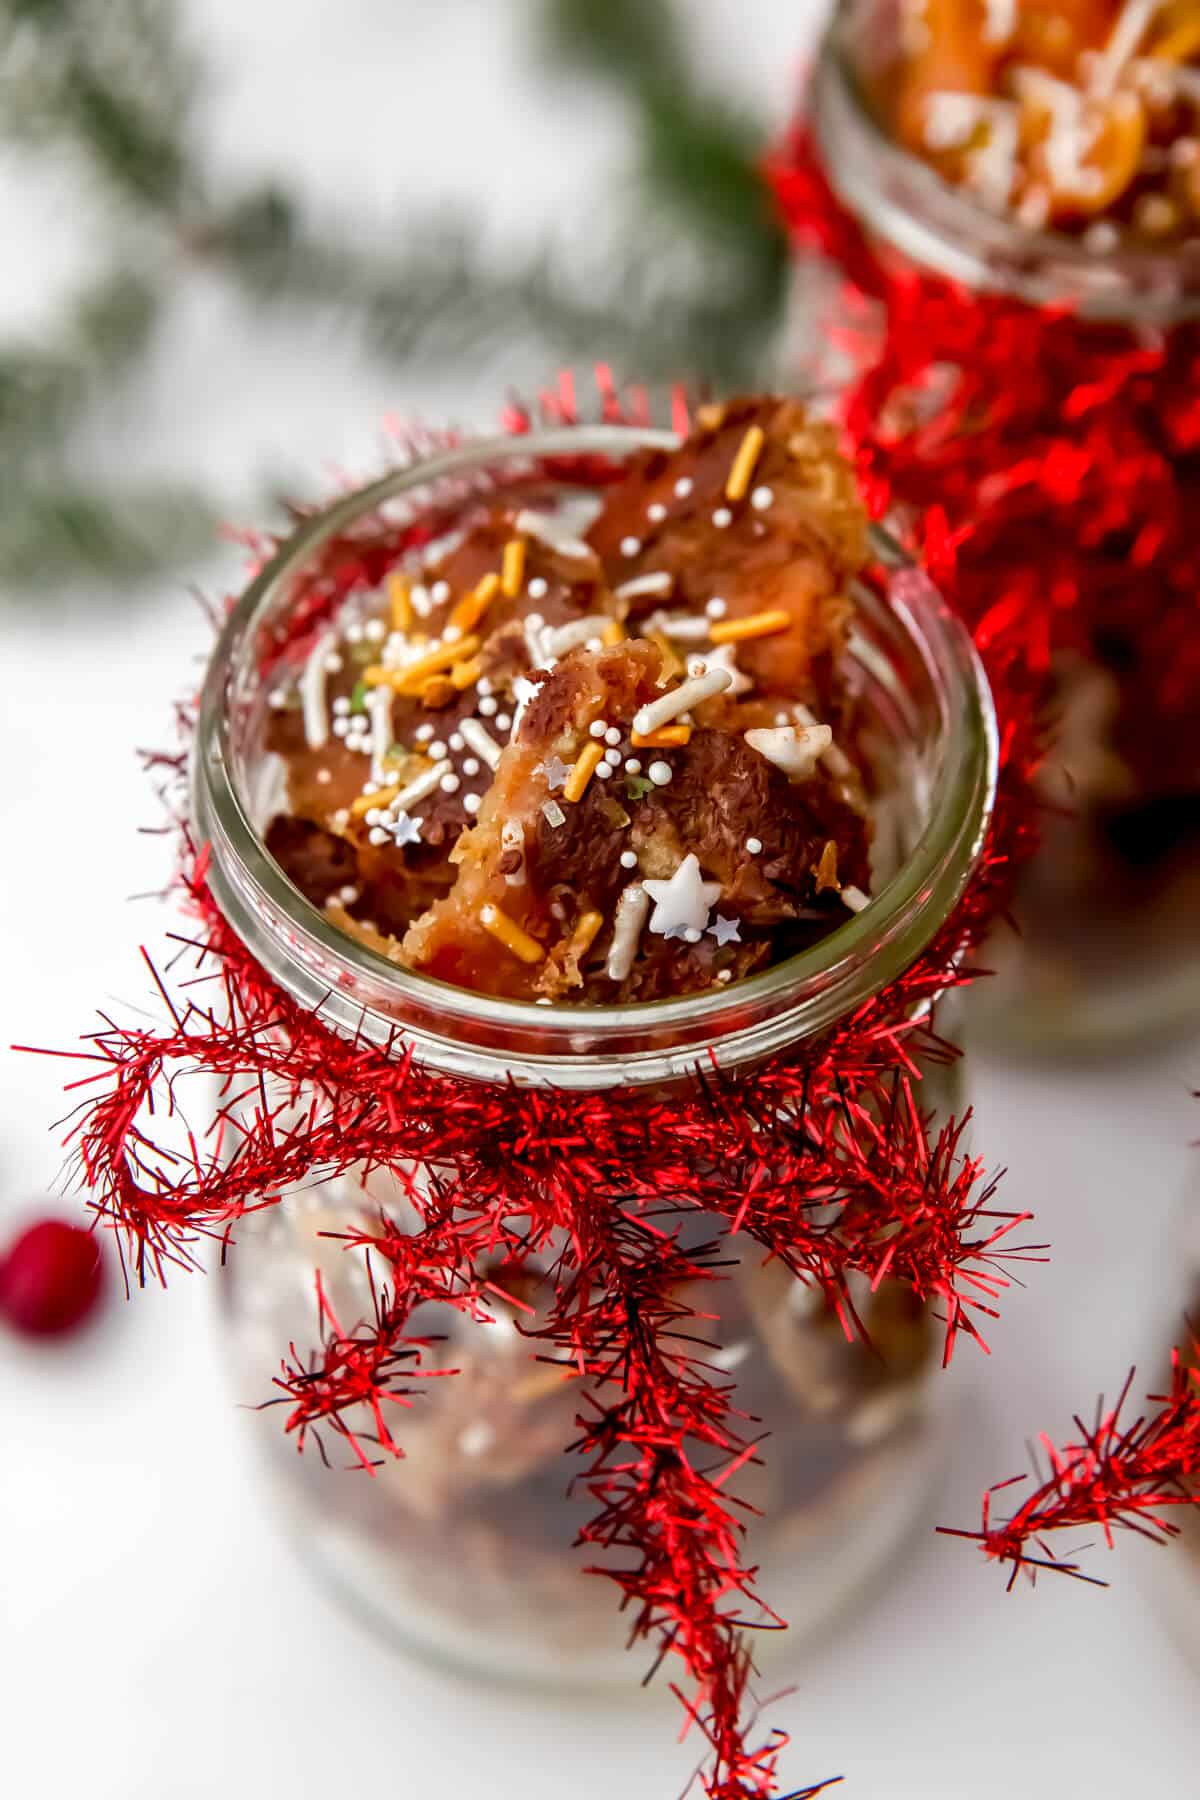 Vegan Christmas crack in holiday jars ready to give for gifts.